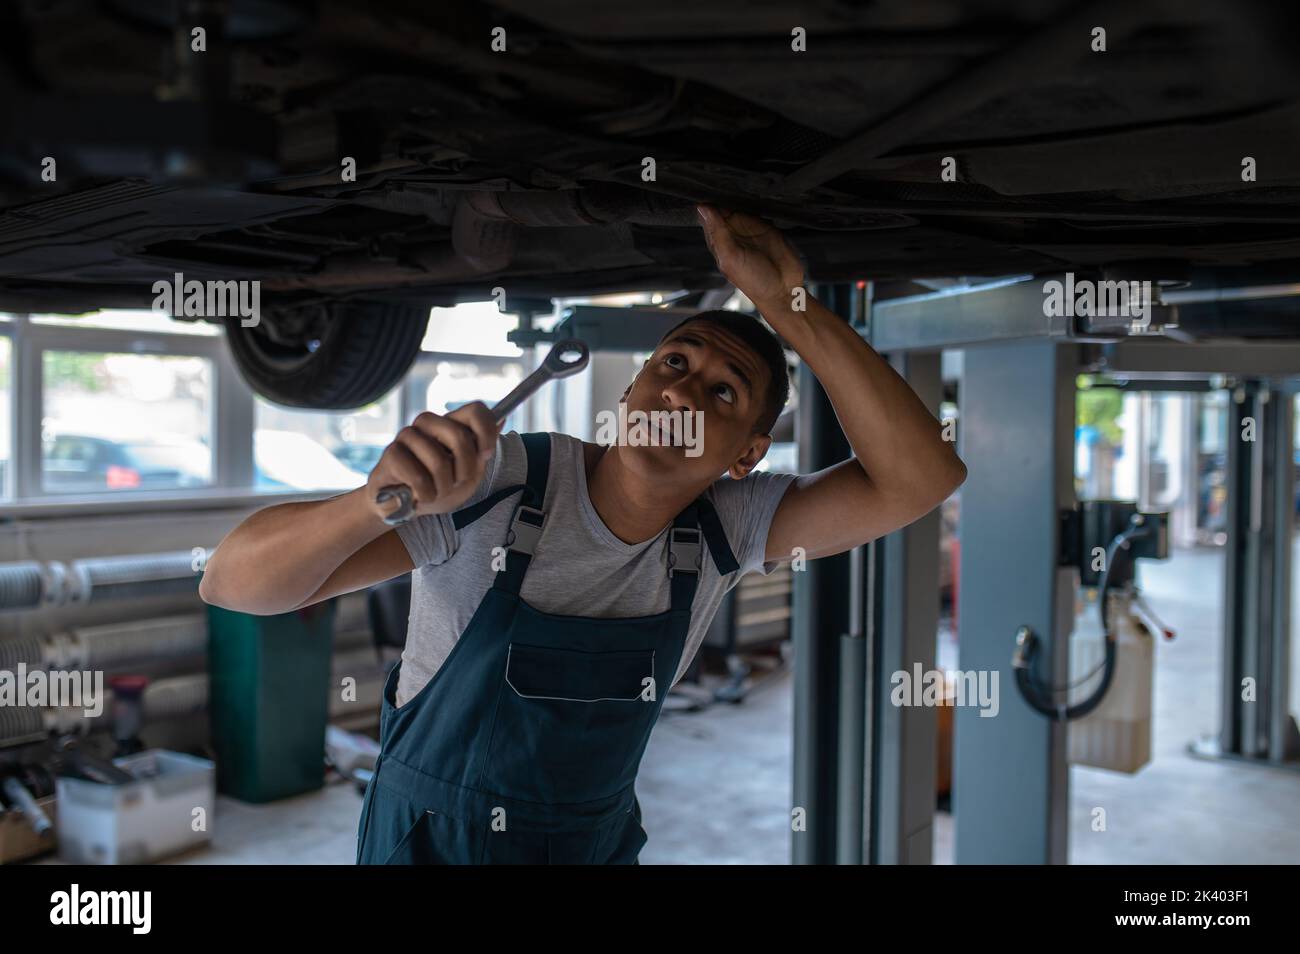 Experienced automotive technician fixing the car undercarriage Stock Photo